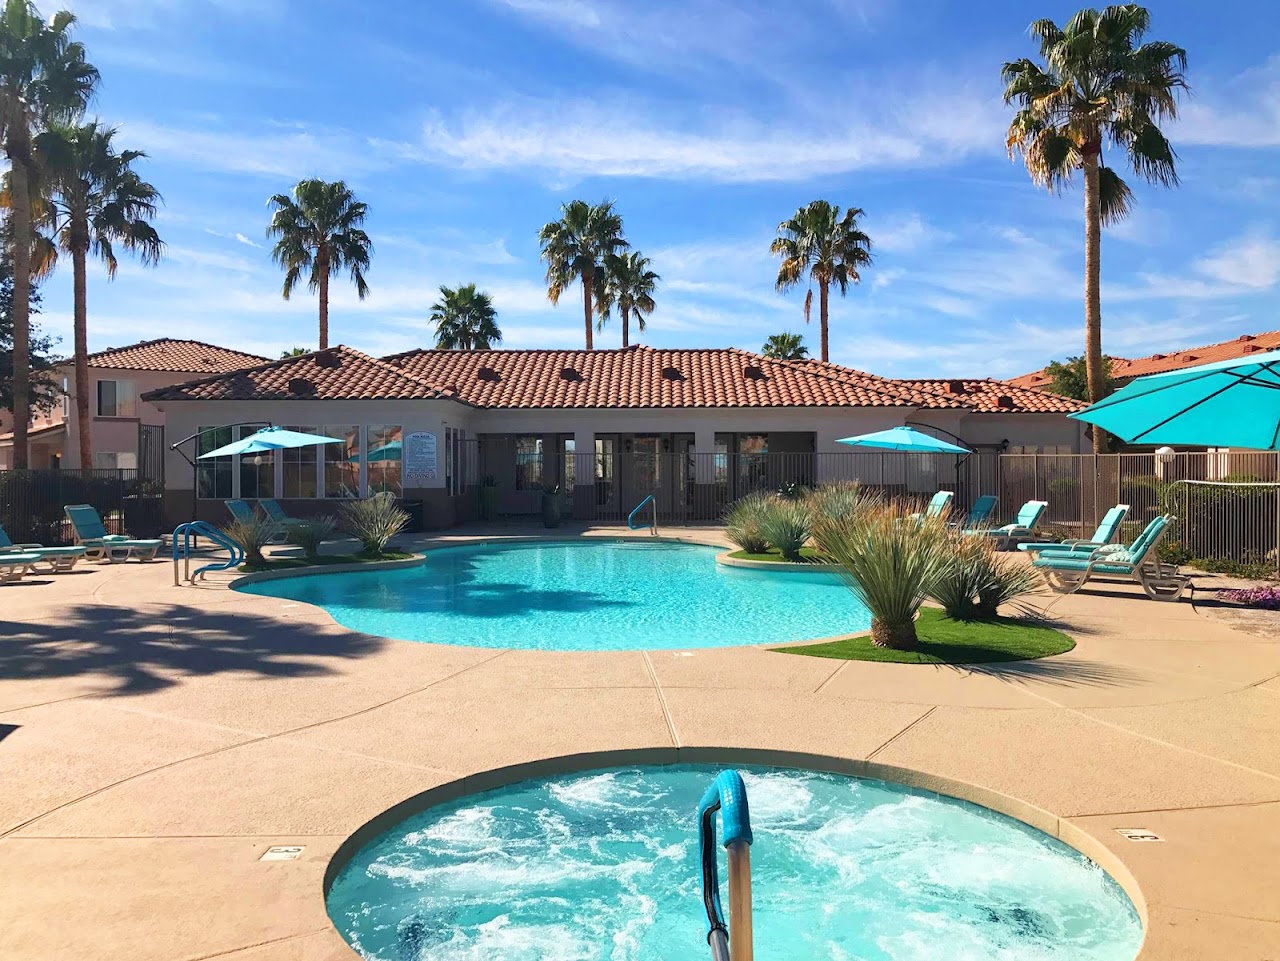 Photo of RANCHO DEL SOL APTS. Affordable housing located at 11039 N 87TH AVE PEORIA, AZ 85345